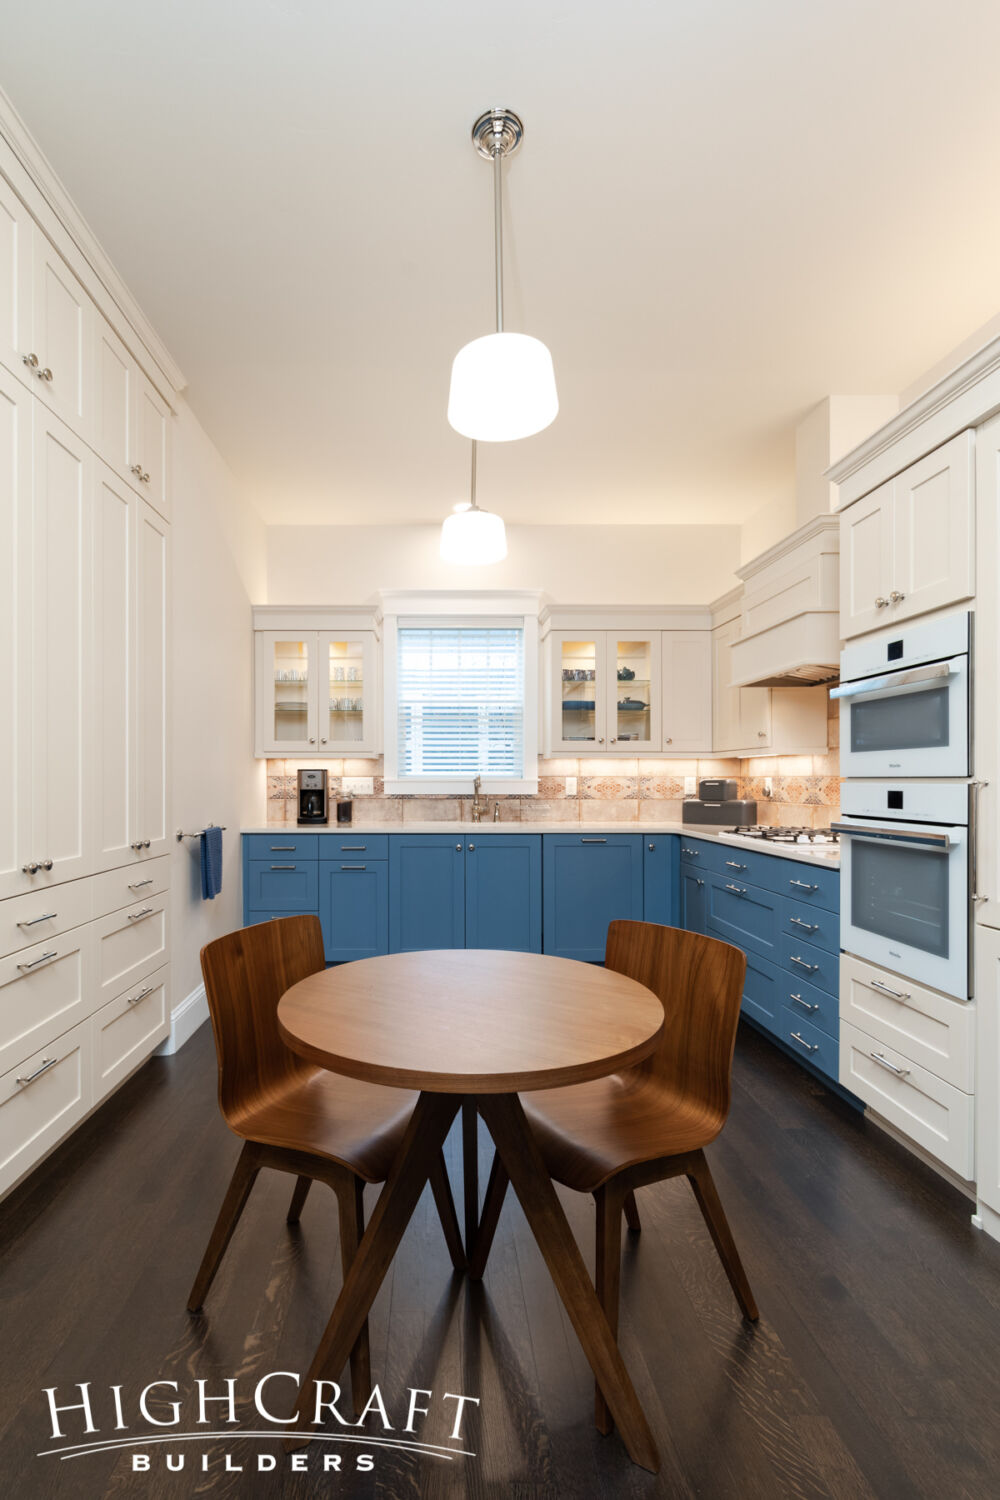 Eclectic-Remodel-in-Old-Town-Transistional-Kitchen-with-Blue-Lower-Cabinets-and-White-Upper-Cabinets